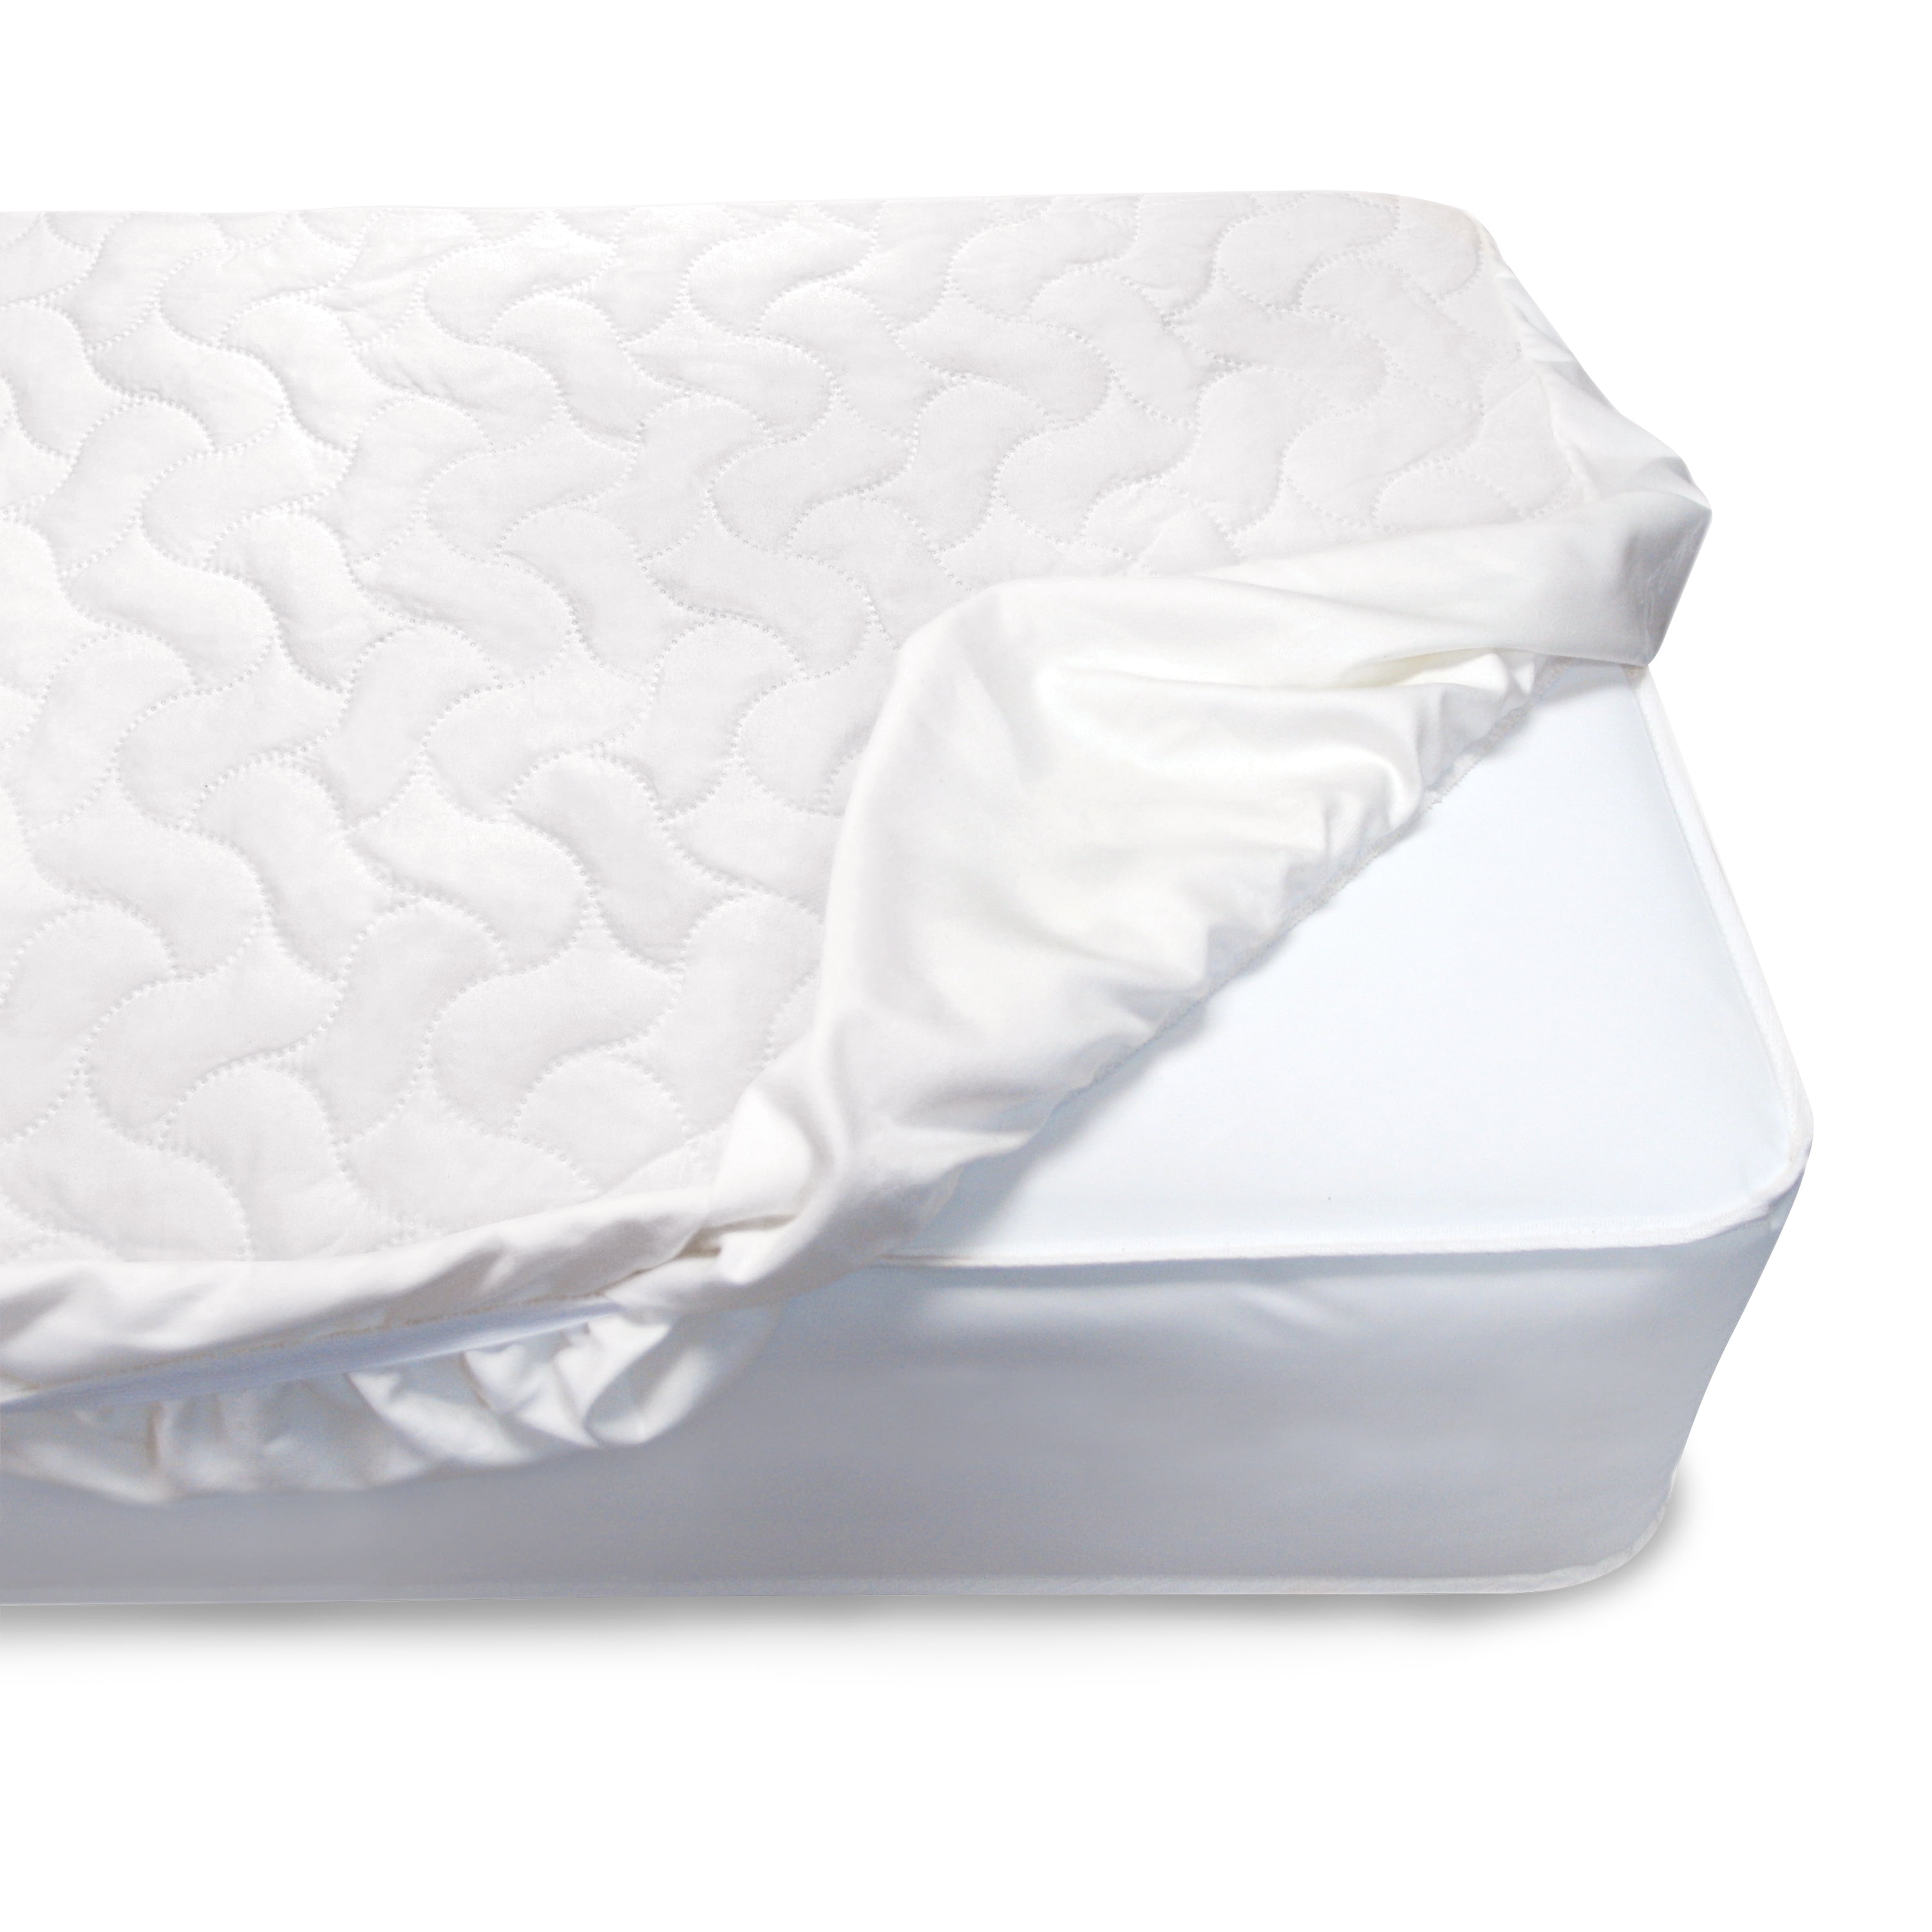 Details about   100% Polyester Breathable Mattress Pad Waterproof Premium Fabric Quilted Cover 